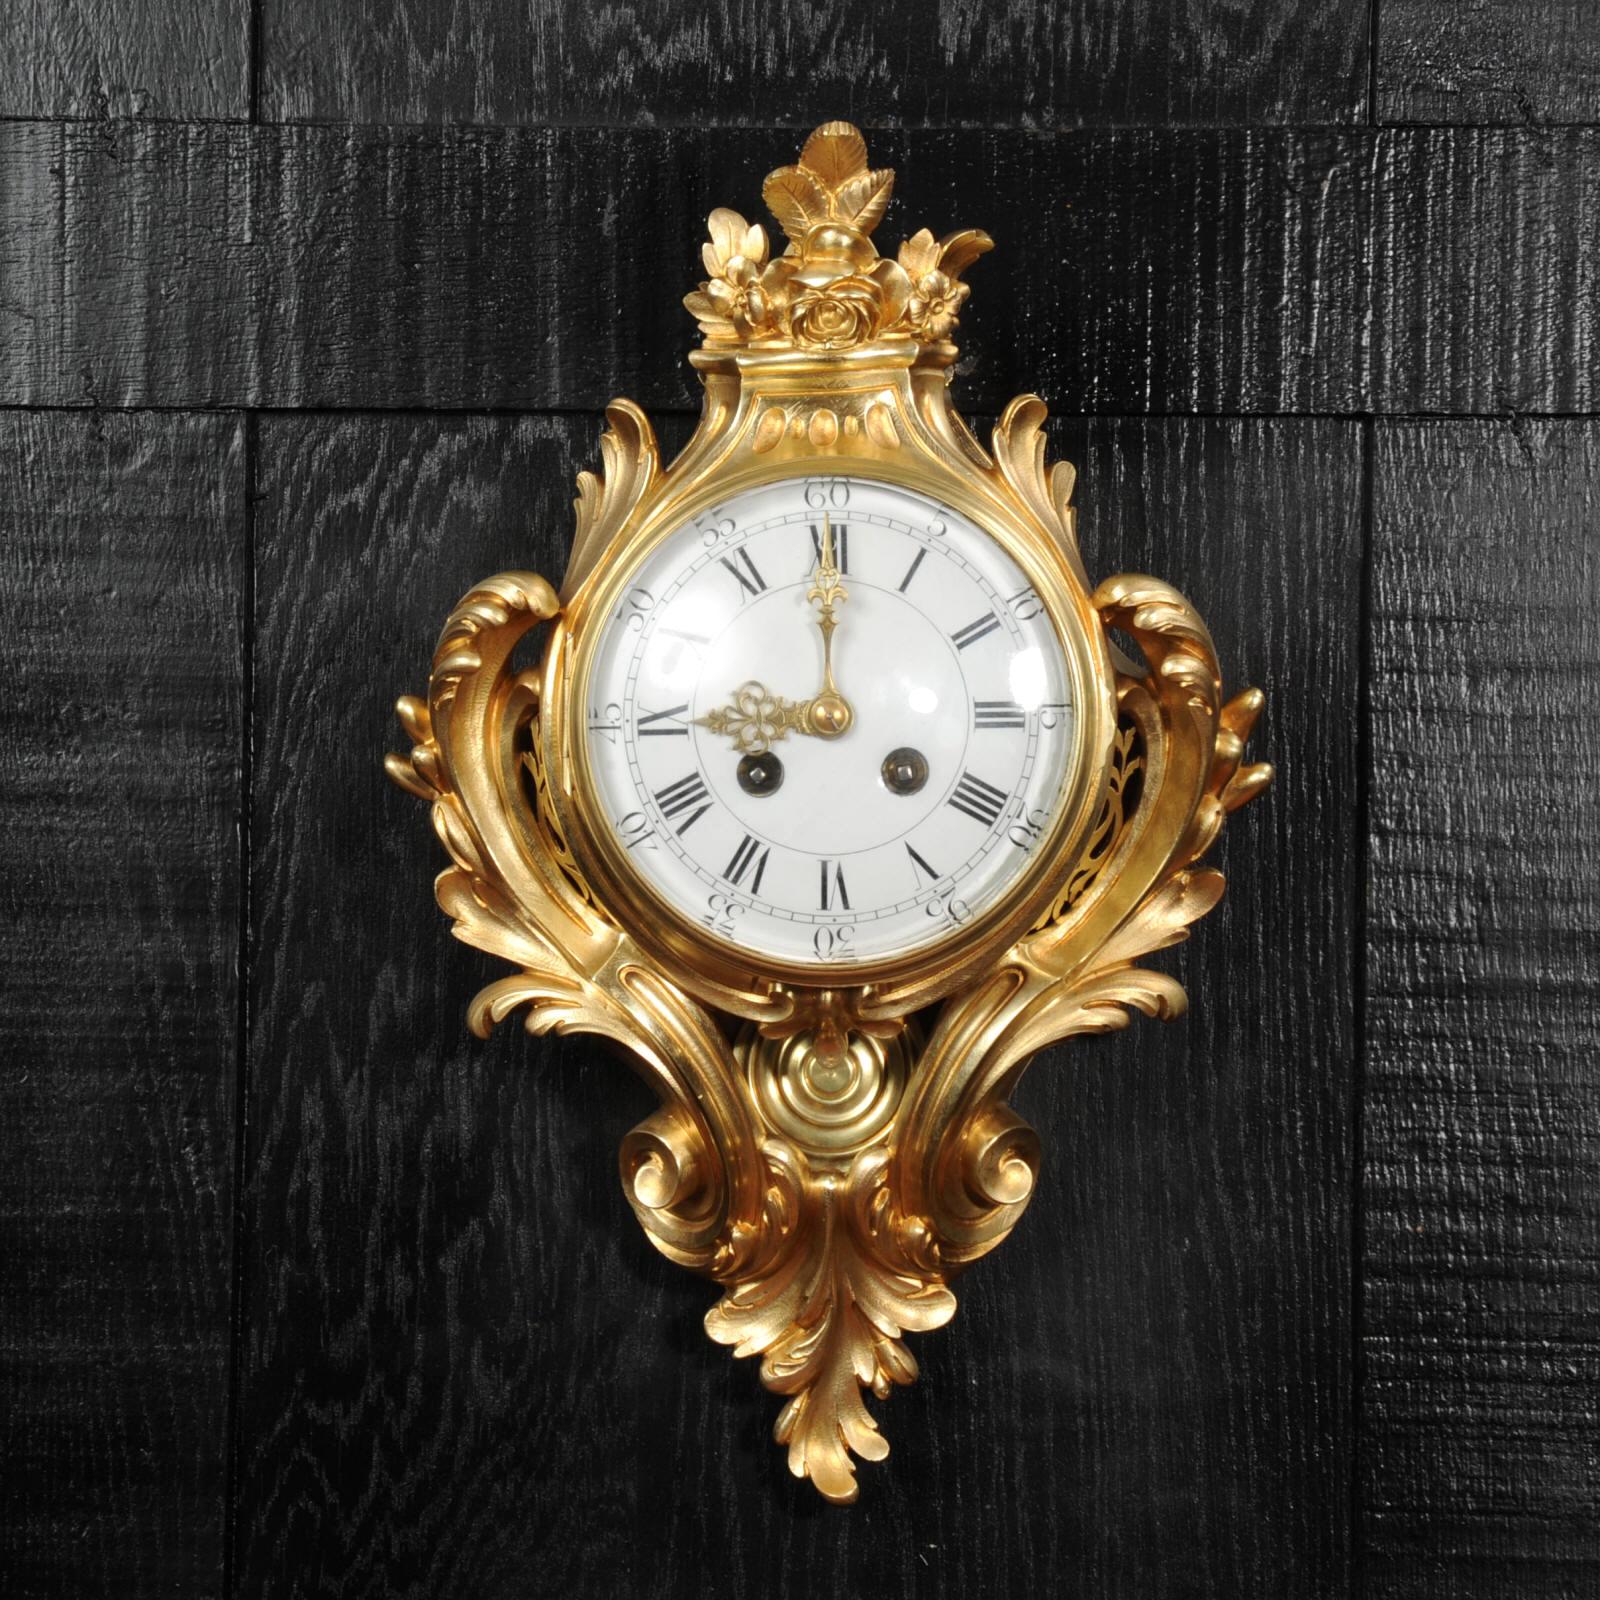 A beautiful, original antique French gilt bronze cartel wall clock. Stunning Louis XV Rocaille design with bold scrolling acanthus leaves and a foliate finial. To the sides are fretted apertures and the pendulum is visible gently swinging below the